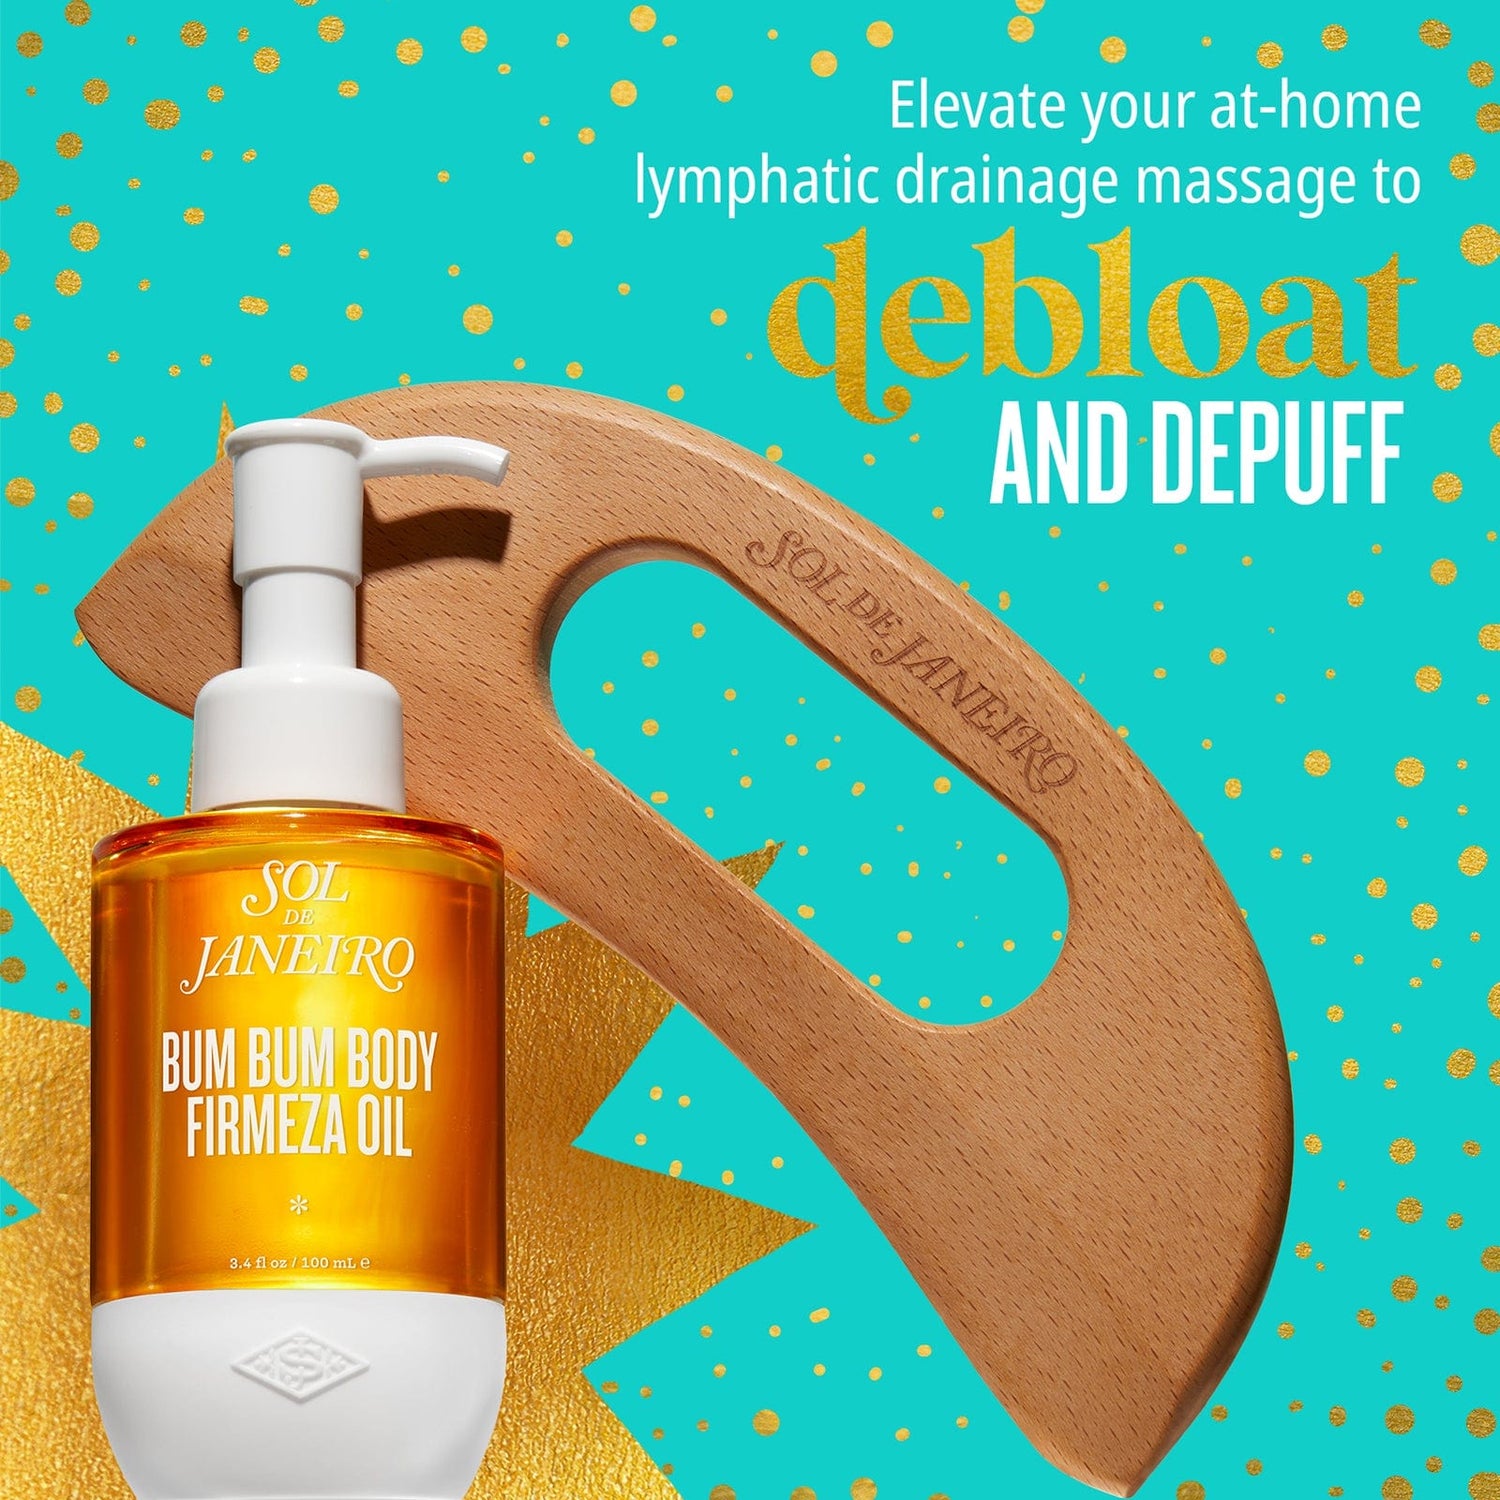 Elevate your at-home lymphatic drainage massage to debloat and depuff